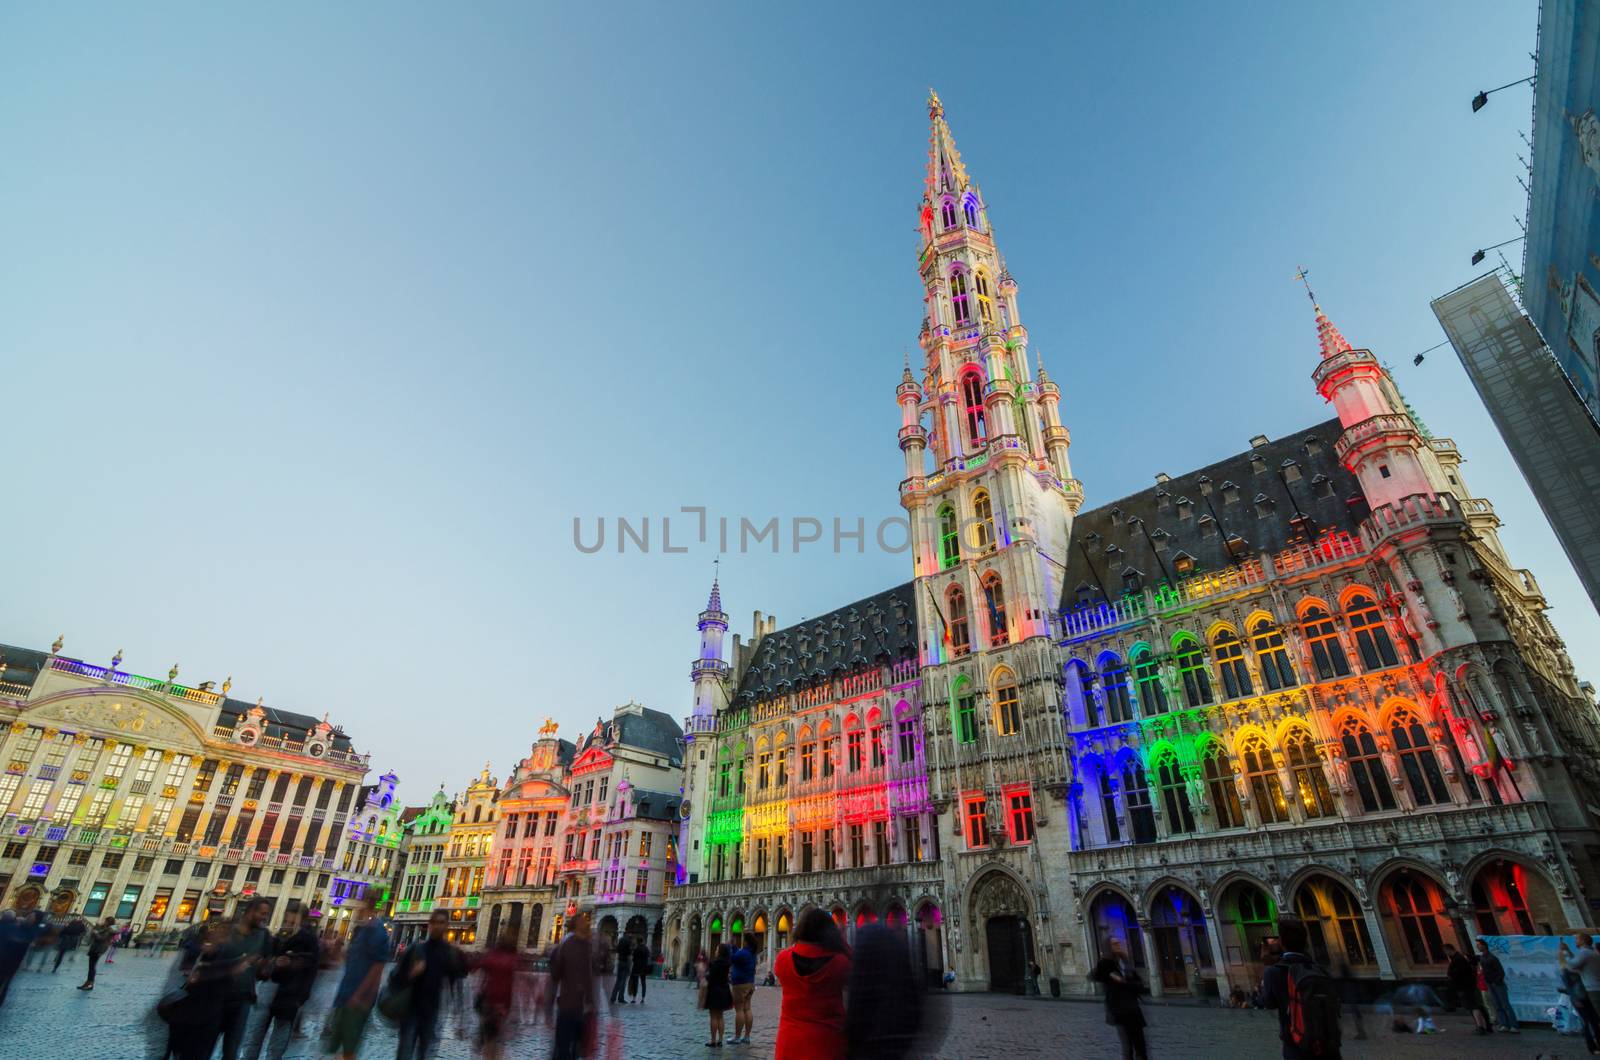 Brussels, Belgium - May 13, 2015: Tourists visiting famous Grand Place (Grote Markt) the central square of Brussels. The square is the most important tourist destination and most memorable landmark in Brussels.